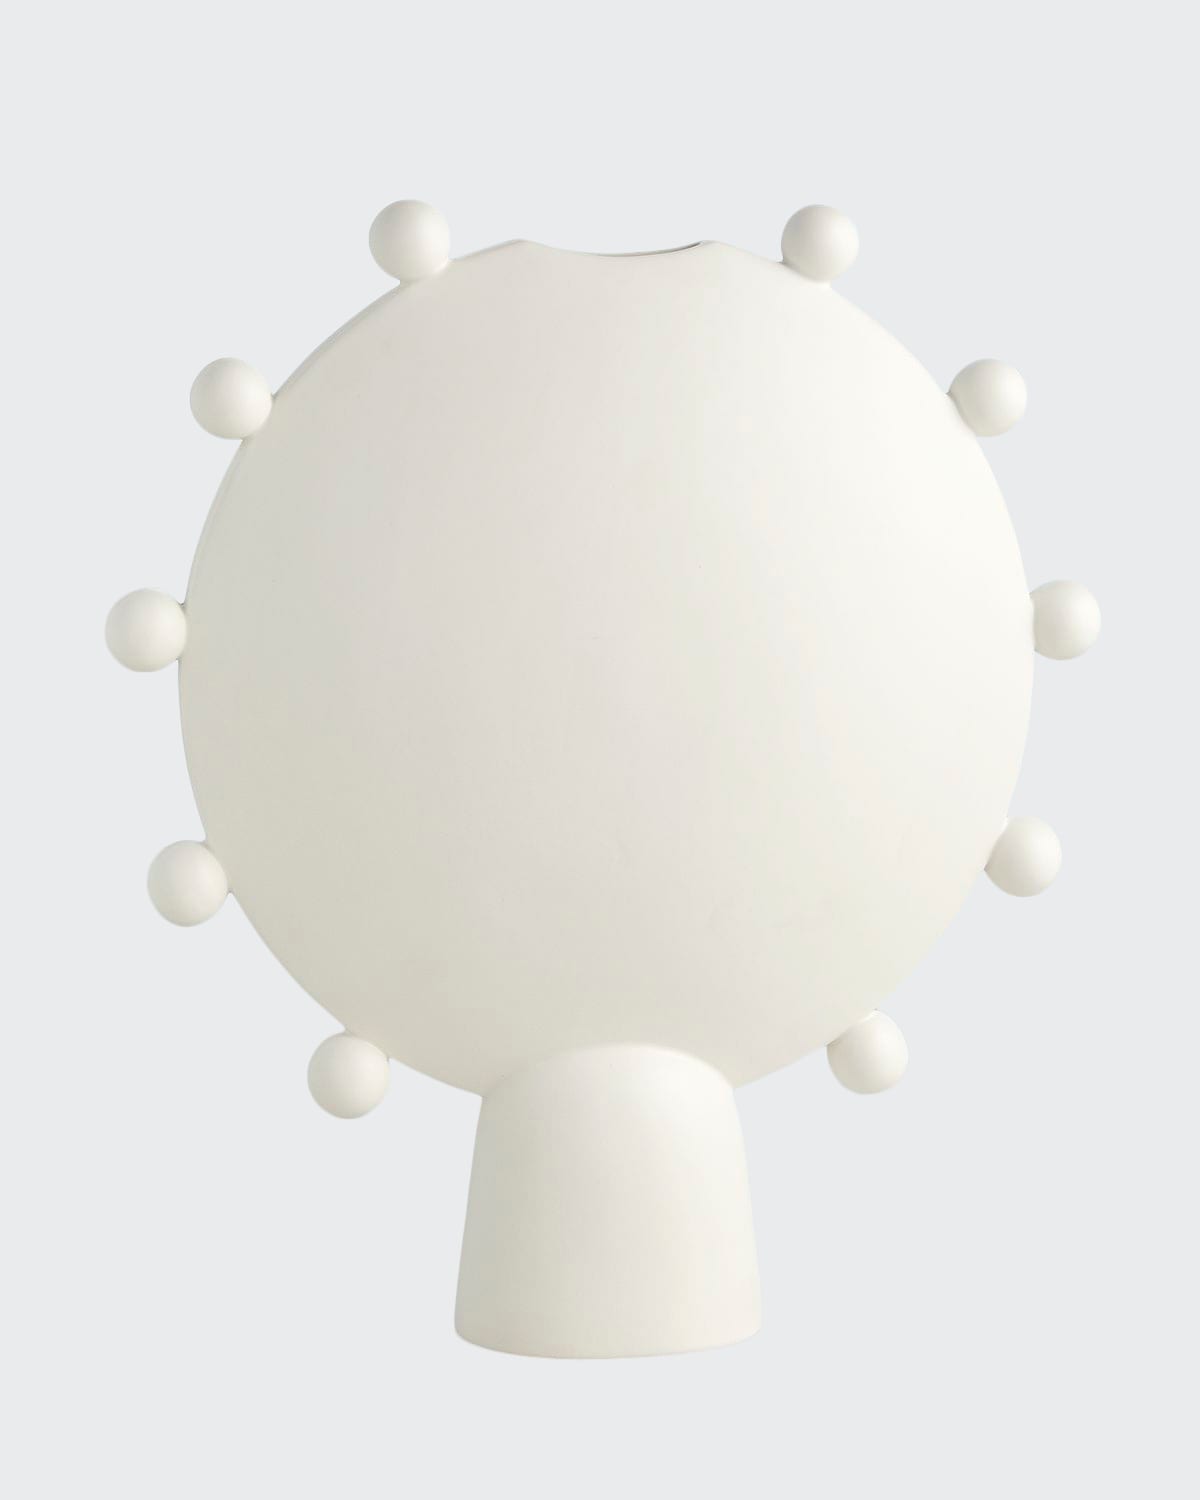 Shop Ashley Childers For Global Views Spheres Collection White Vessel